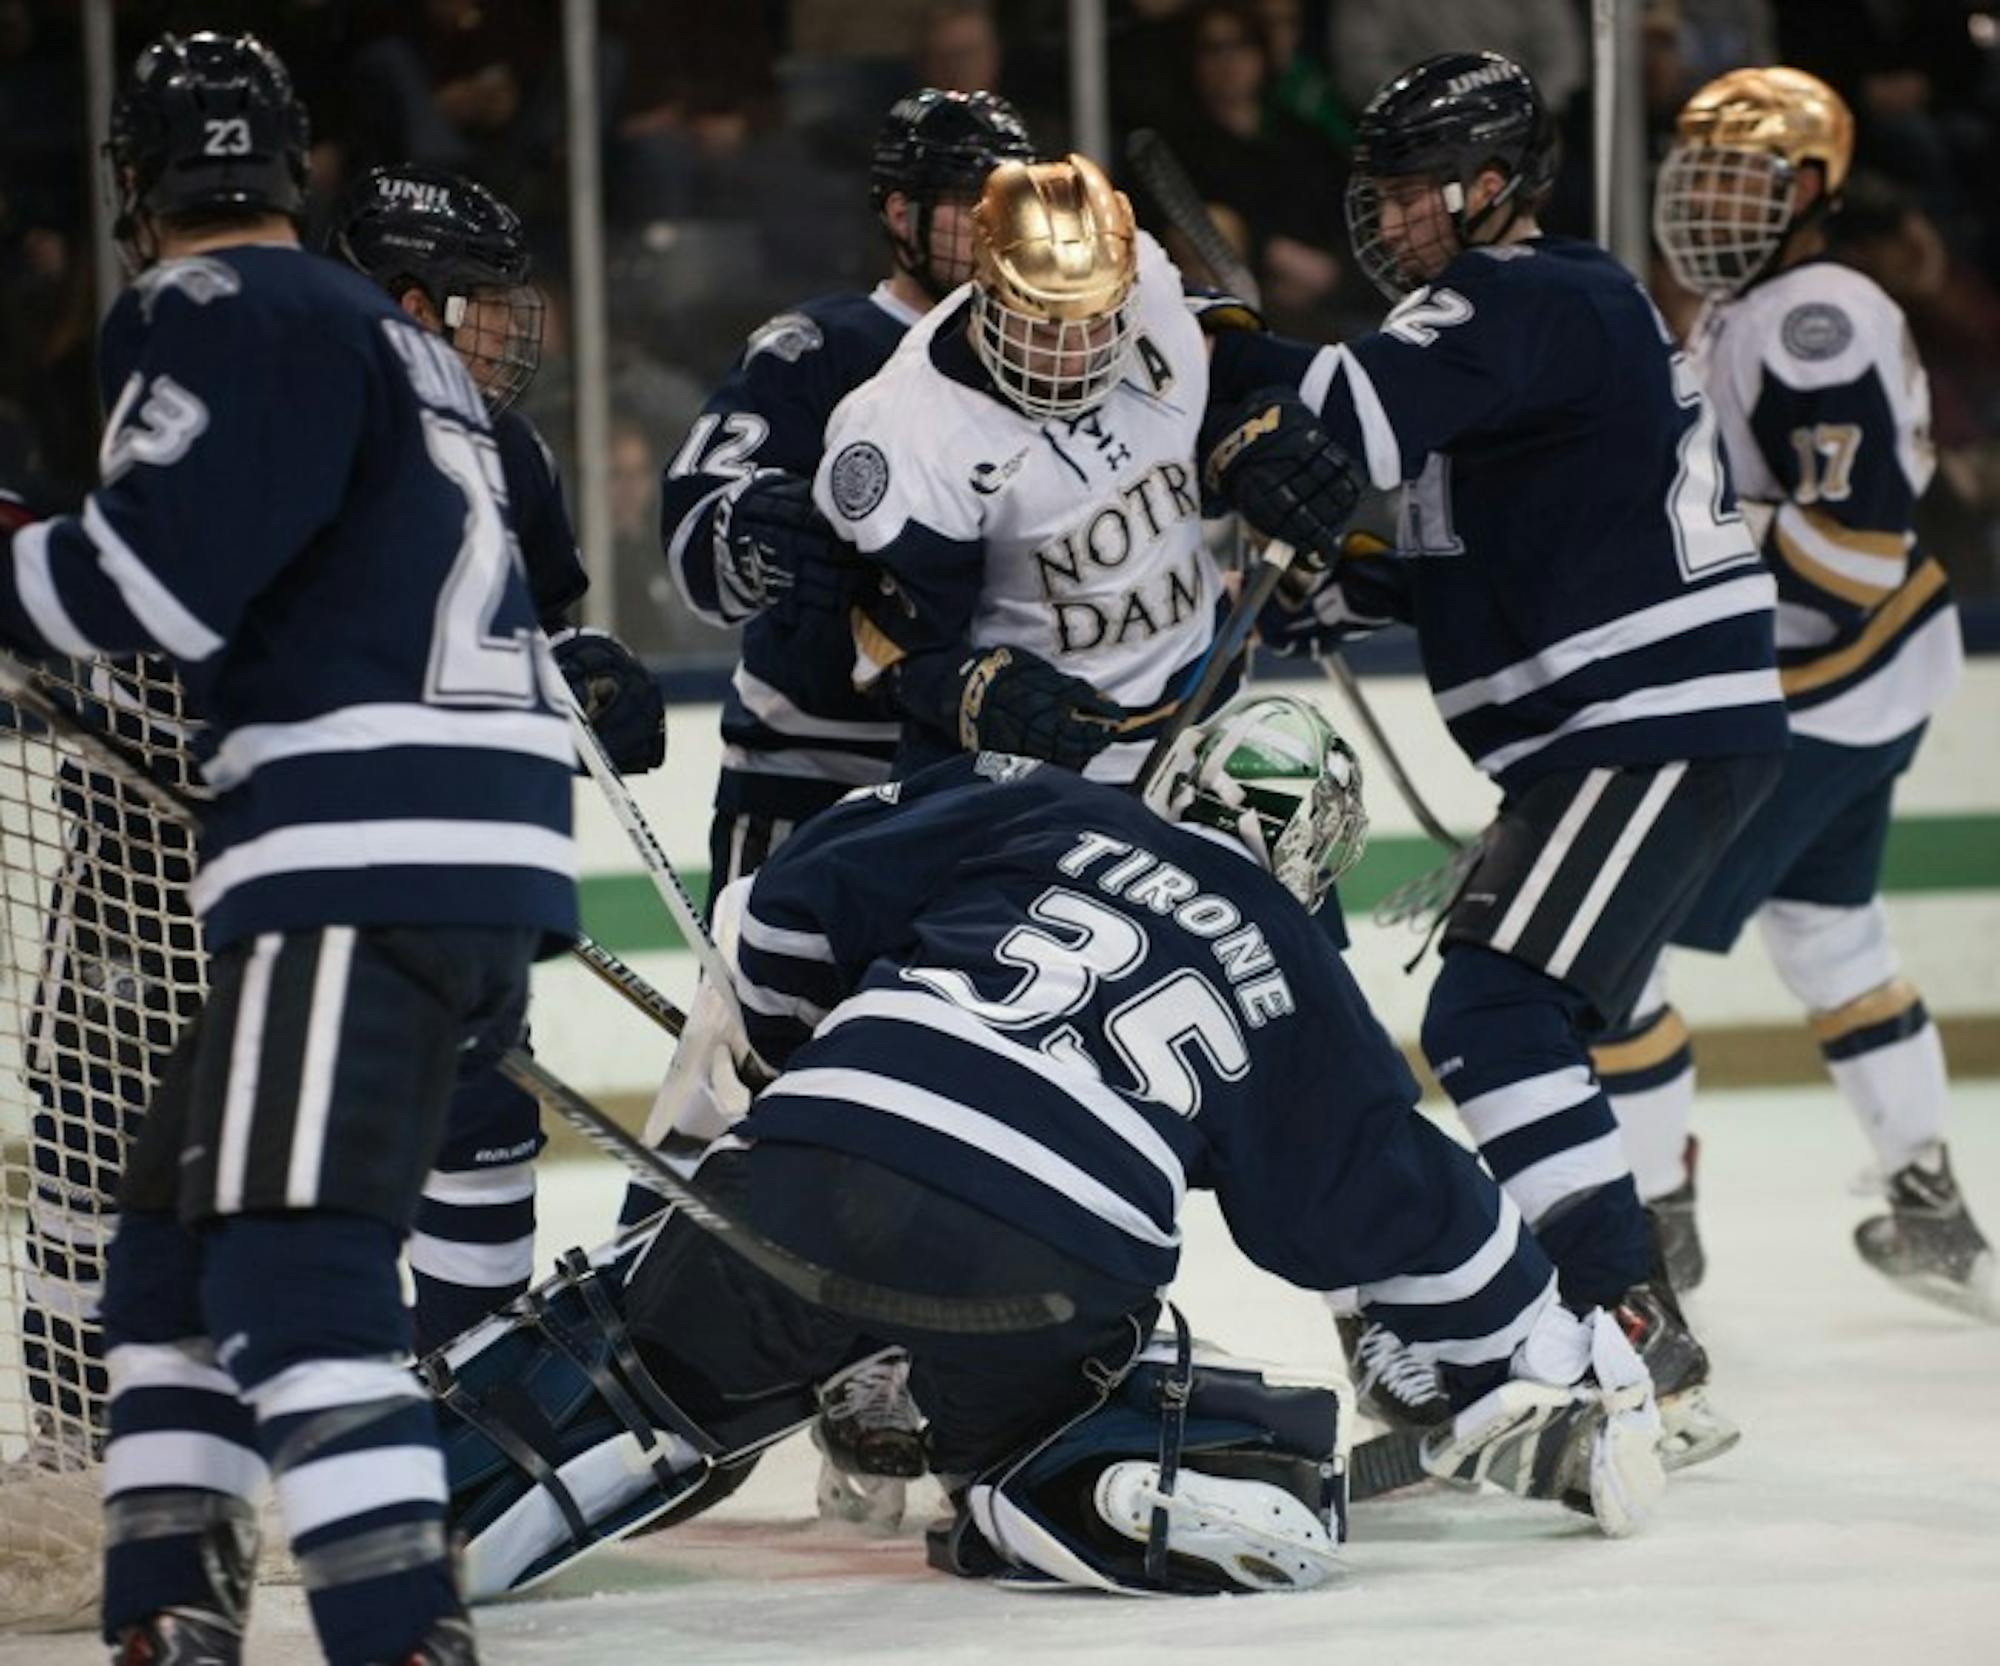 Irish senior right winger Peter Schneider scraps during Notre Dame's 5-2 loss to New Hampshire on Compton Family Ice Arena on Jan. 30.